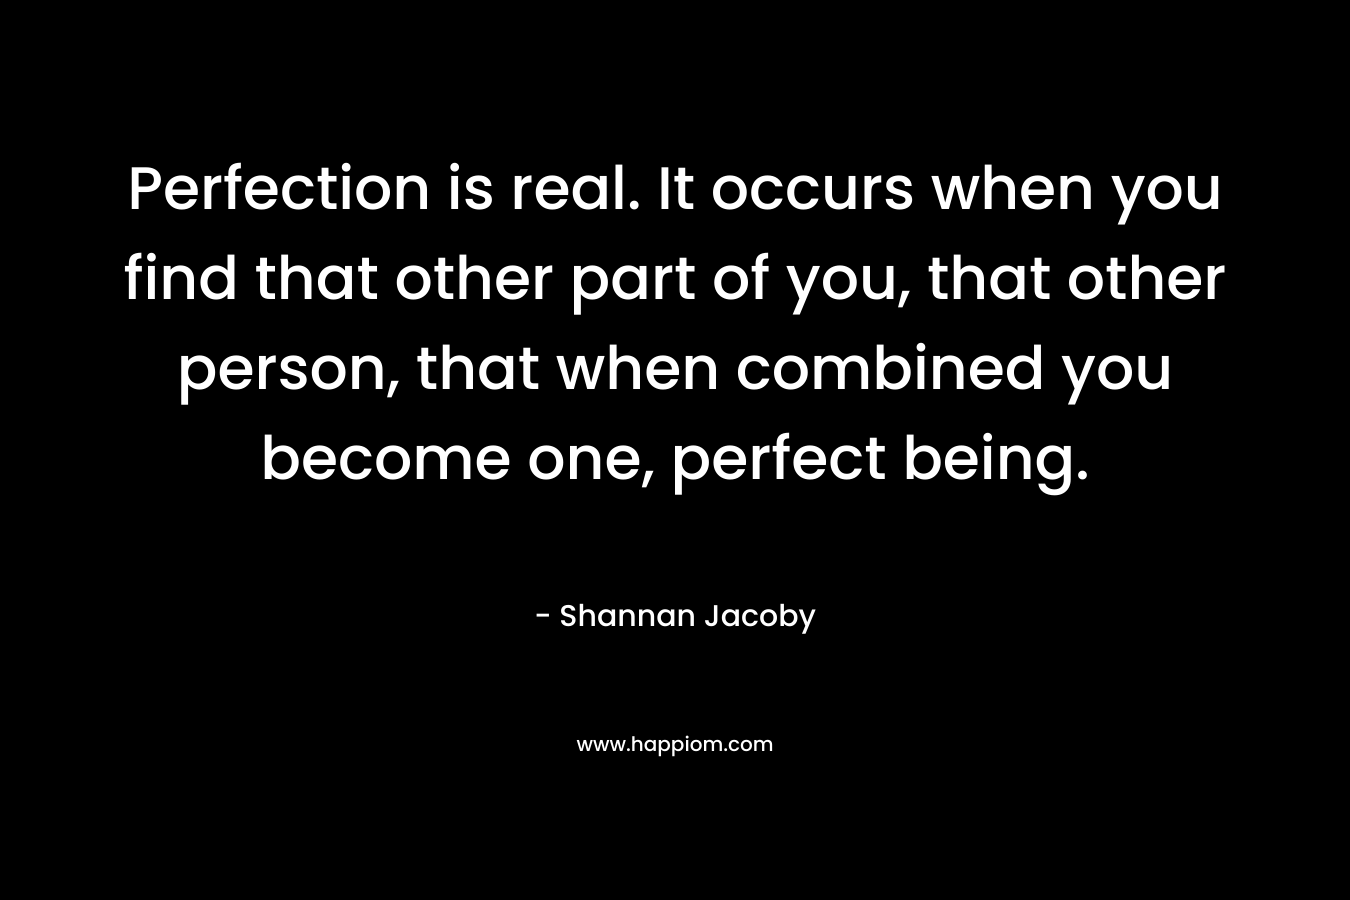 Perfection is real. It occurs when you find that other part of you, that other person, that when combined you become one, perfect being. – Shannan Jacoby